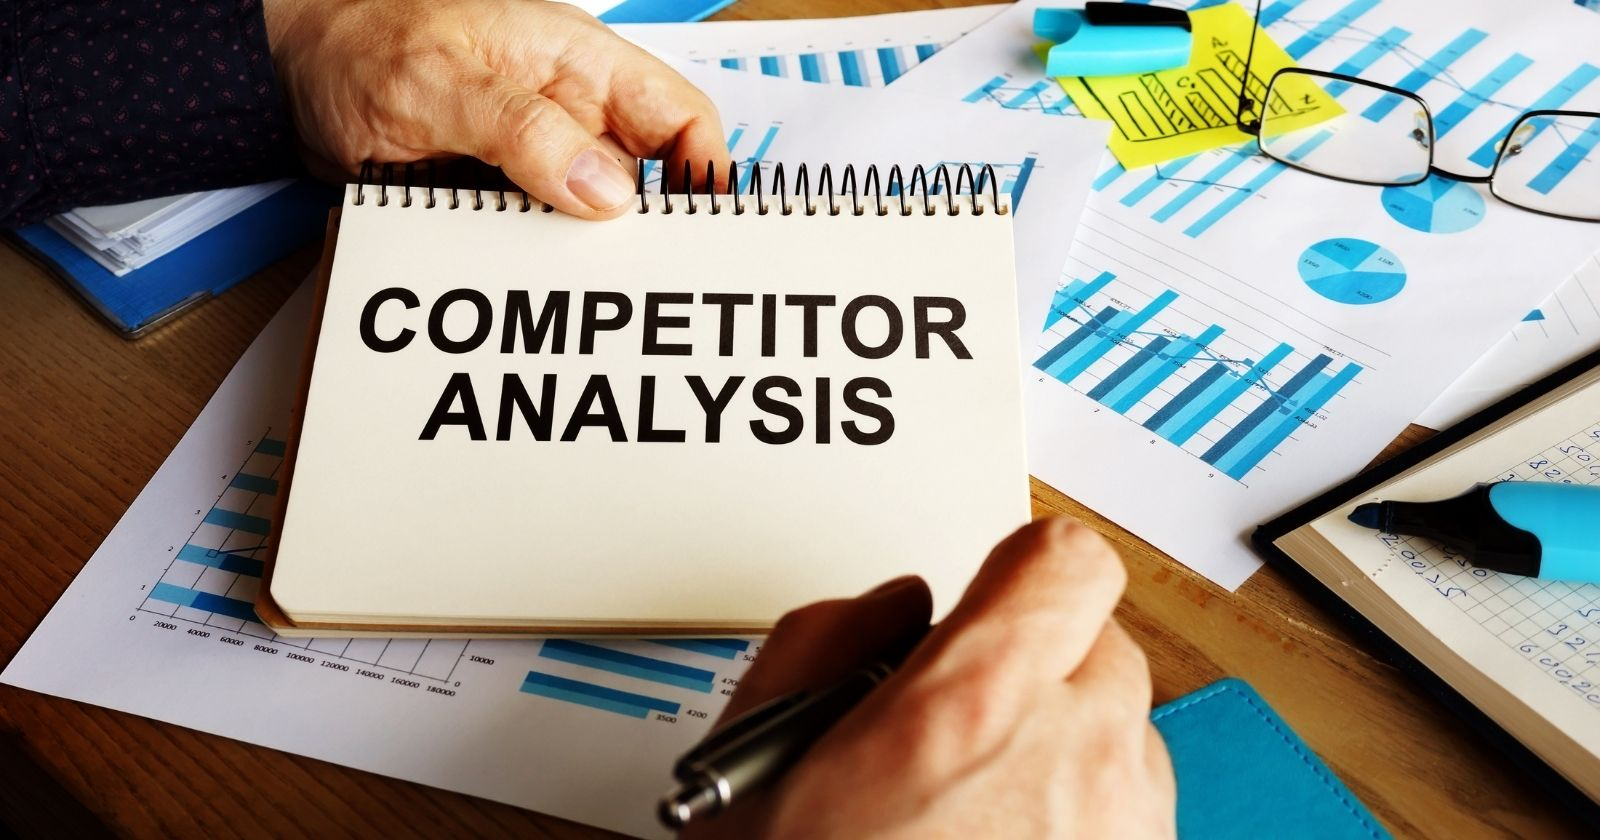 Notepad with a text "Competitor Analysis"